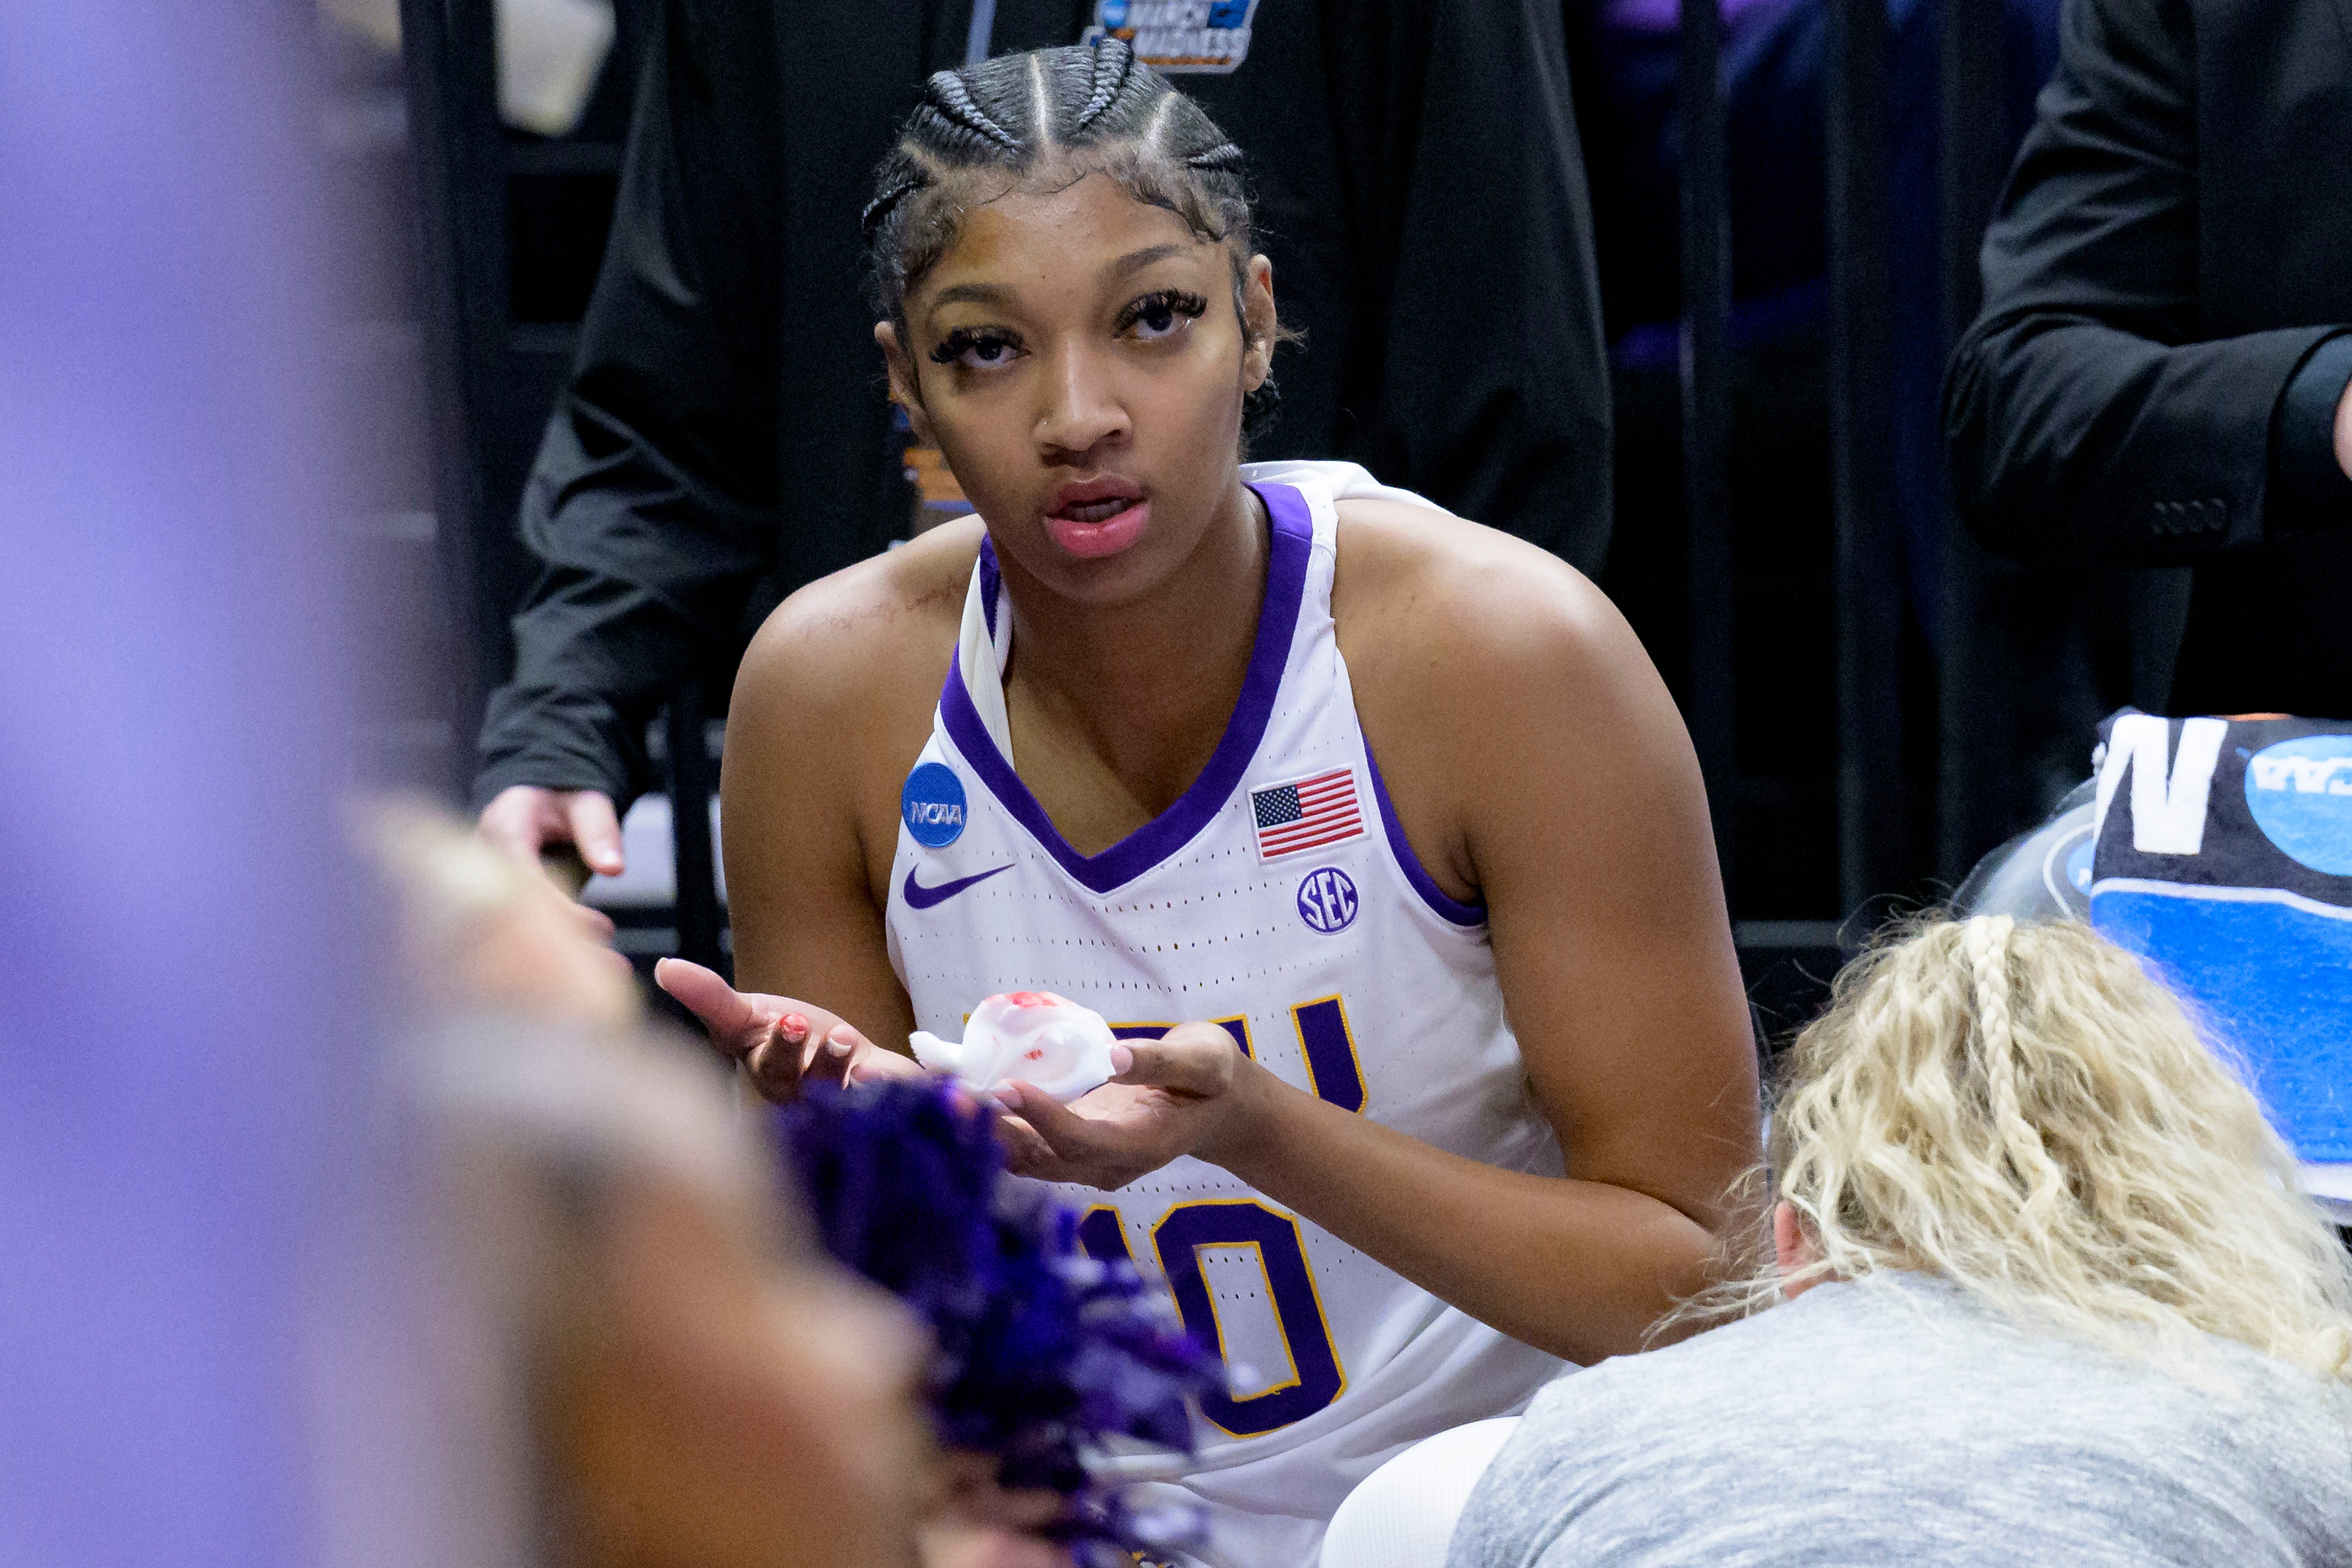 LSU forward Angel Reese (10) receives treatment after being hit on the mouth during the first half of the team's second-round college basketball game against Michigan in the women's NCAA Tournament in Baton Rouge, La., Sunday, March 19, 2023. (AP Photo/Matthew Hinton)